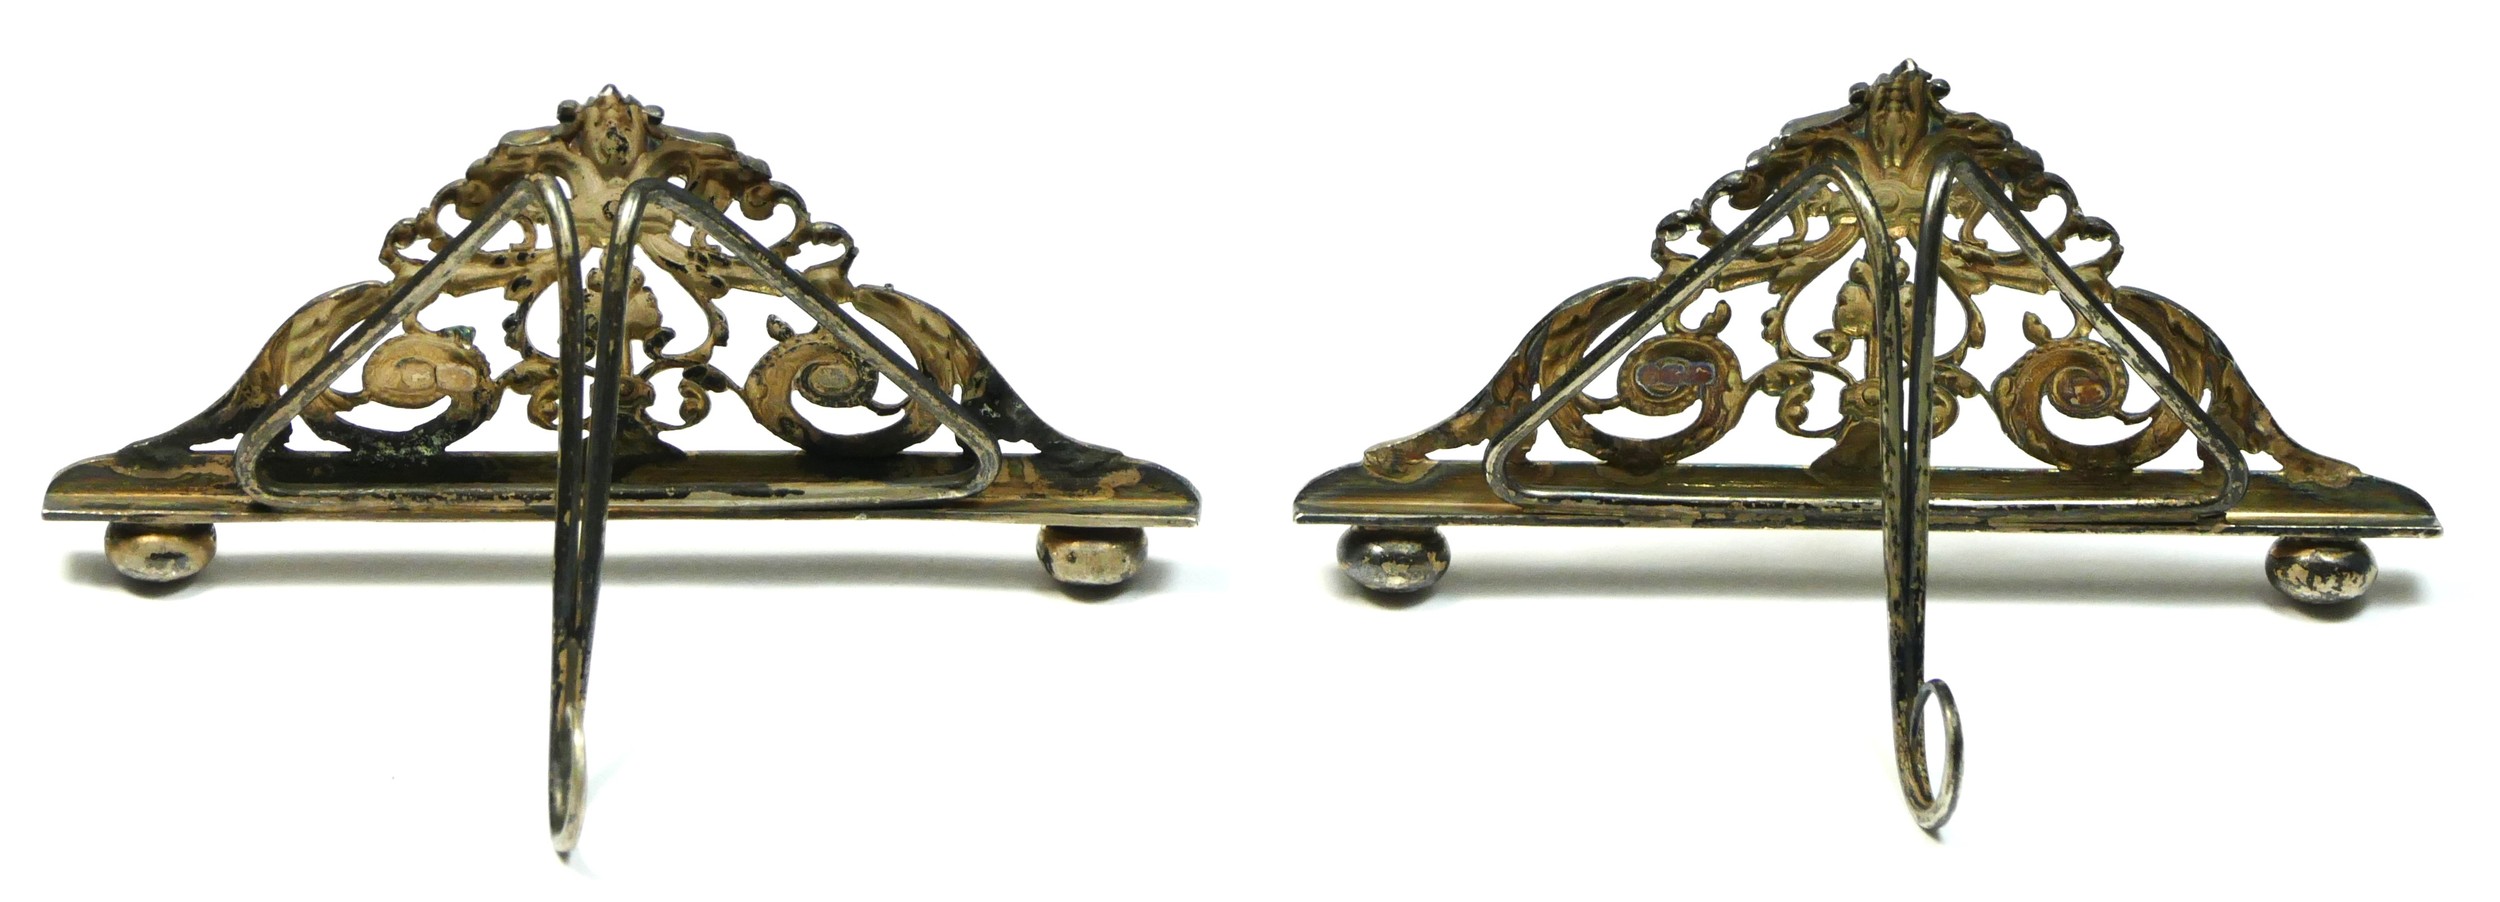 An Edwardian silver pair of menu holders, London 1904, with pierced scroll decoration, 9.5 x 5cm, - Image 3 of 3